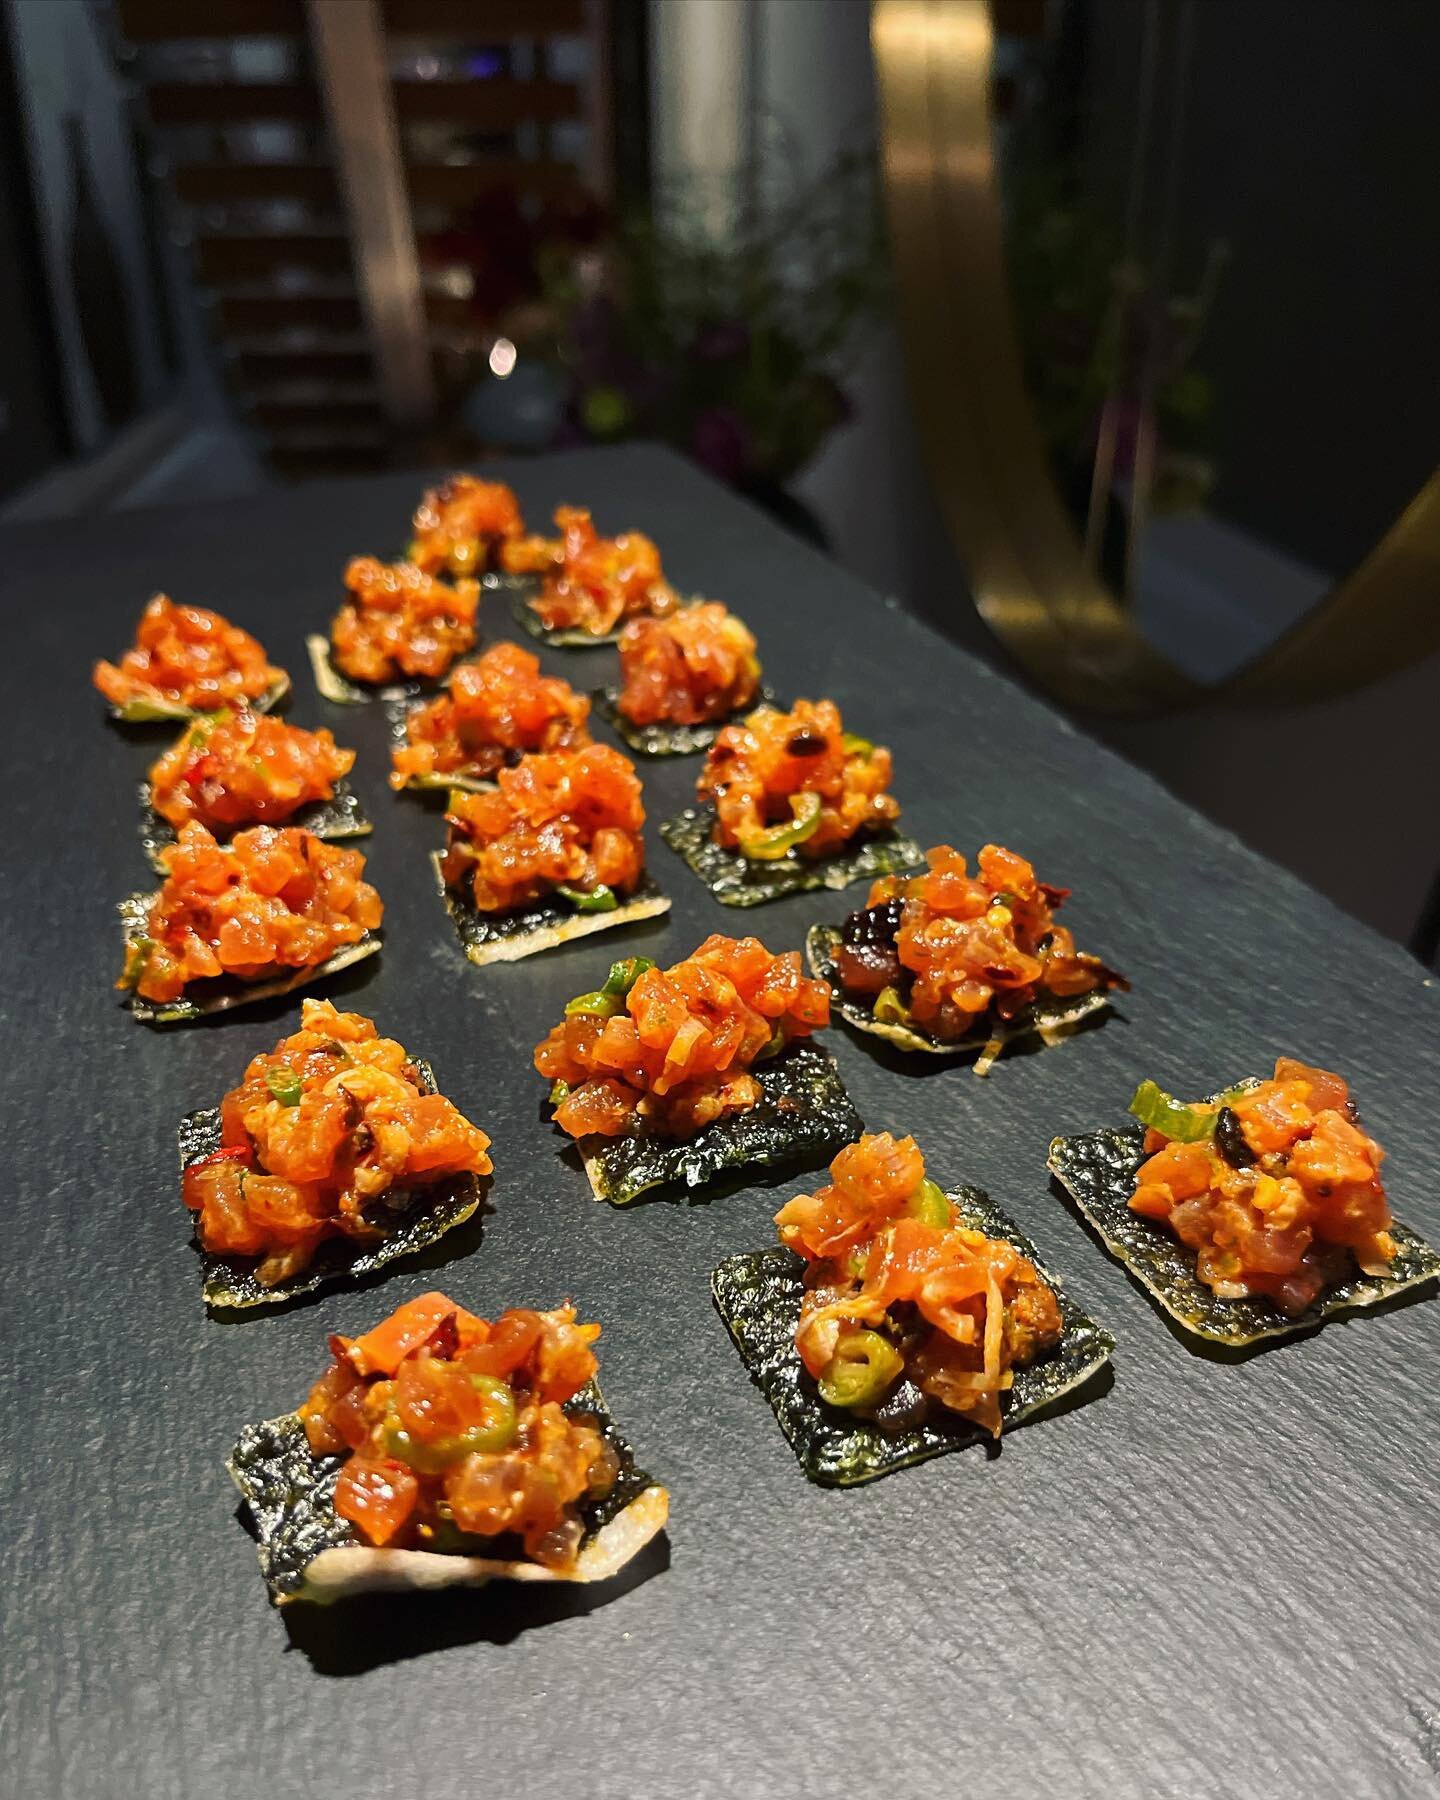 Guest&rsquo;s favourite canap&eacute;: Spicy tuna tartare with fermented chilli, pickled ginger, roasted sesame and lime on a nori crisp 

#pureindulgencecatering #londoncaterer #londonprivatecatering #cotswoldscatering #cotswoldscaterer